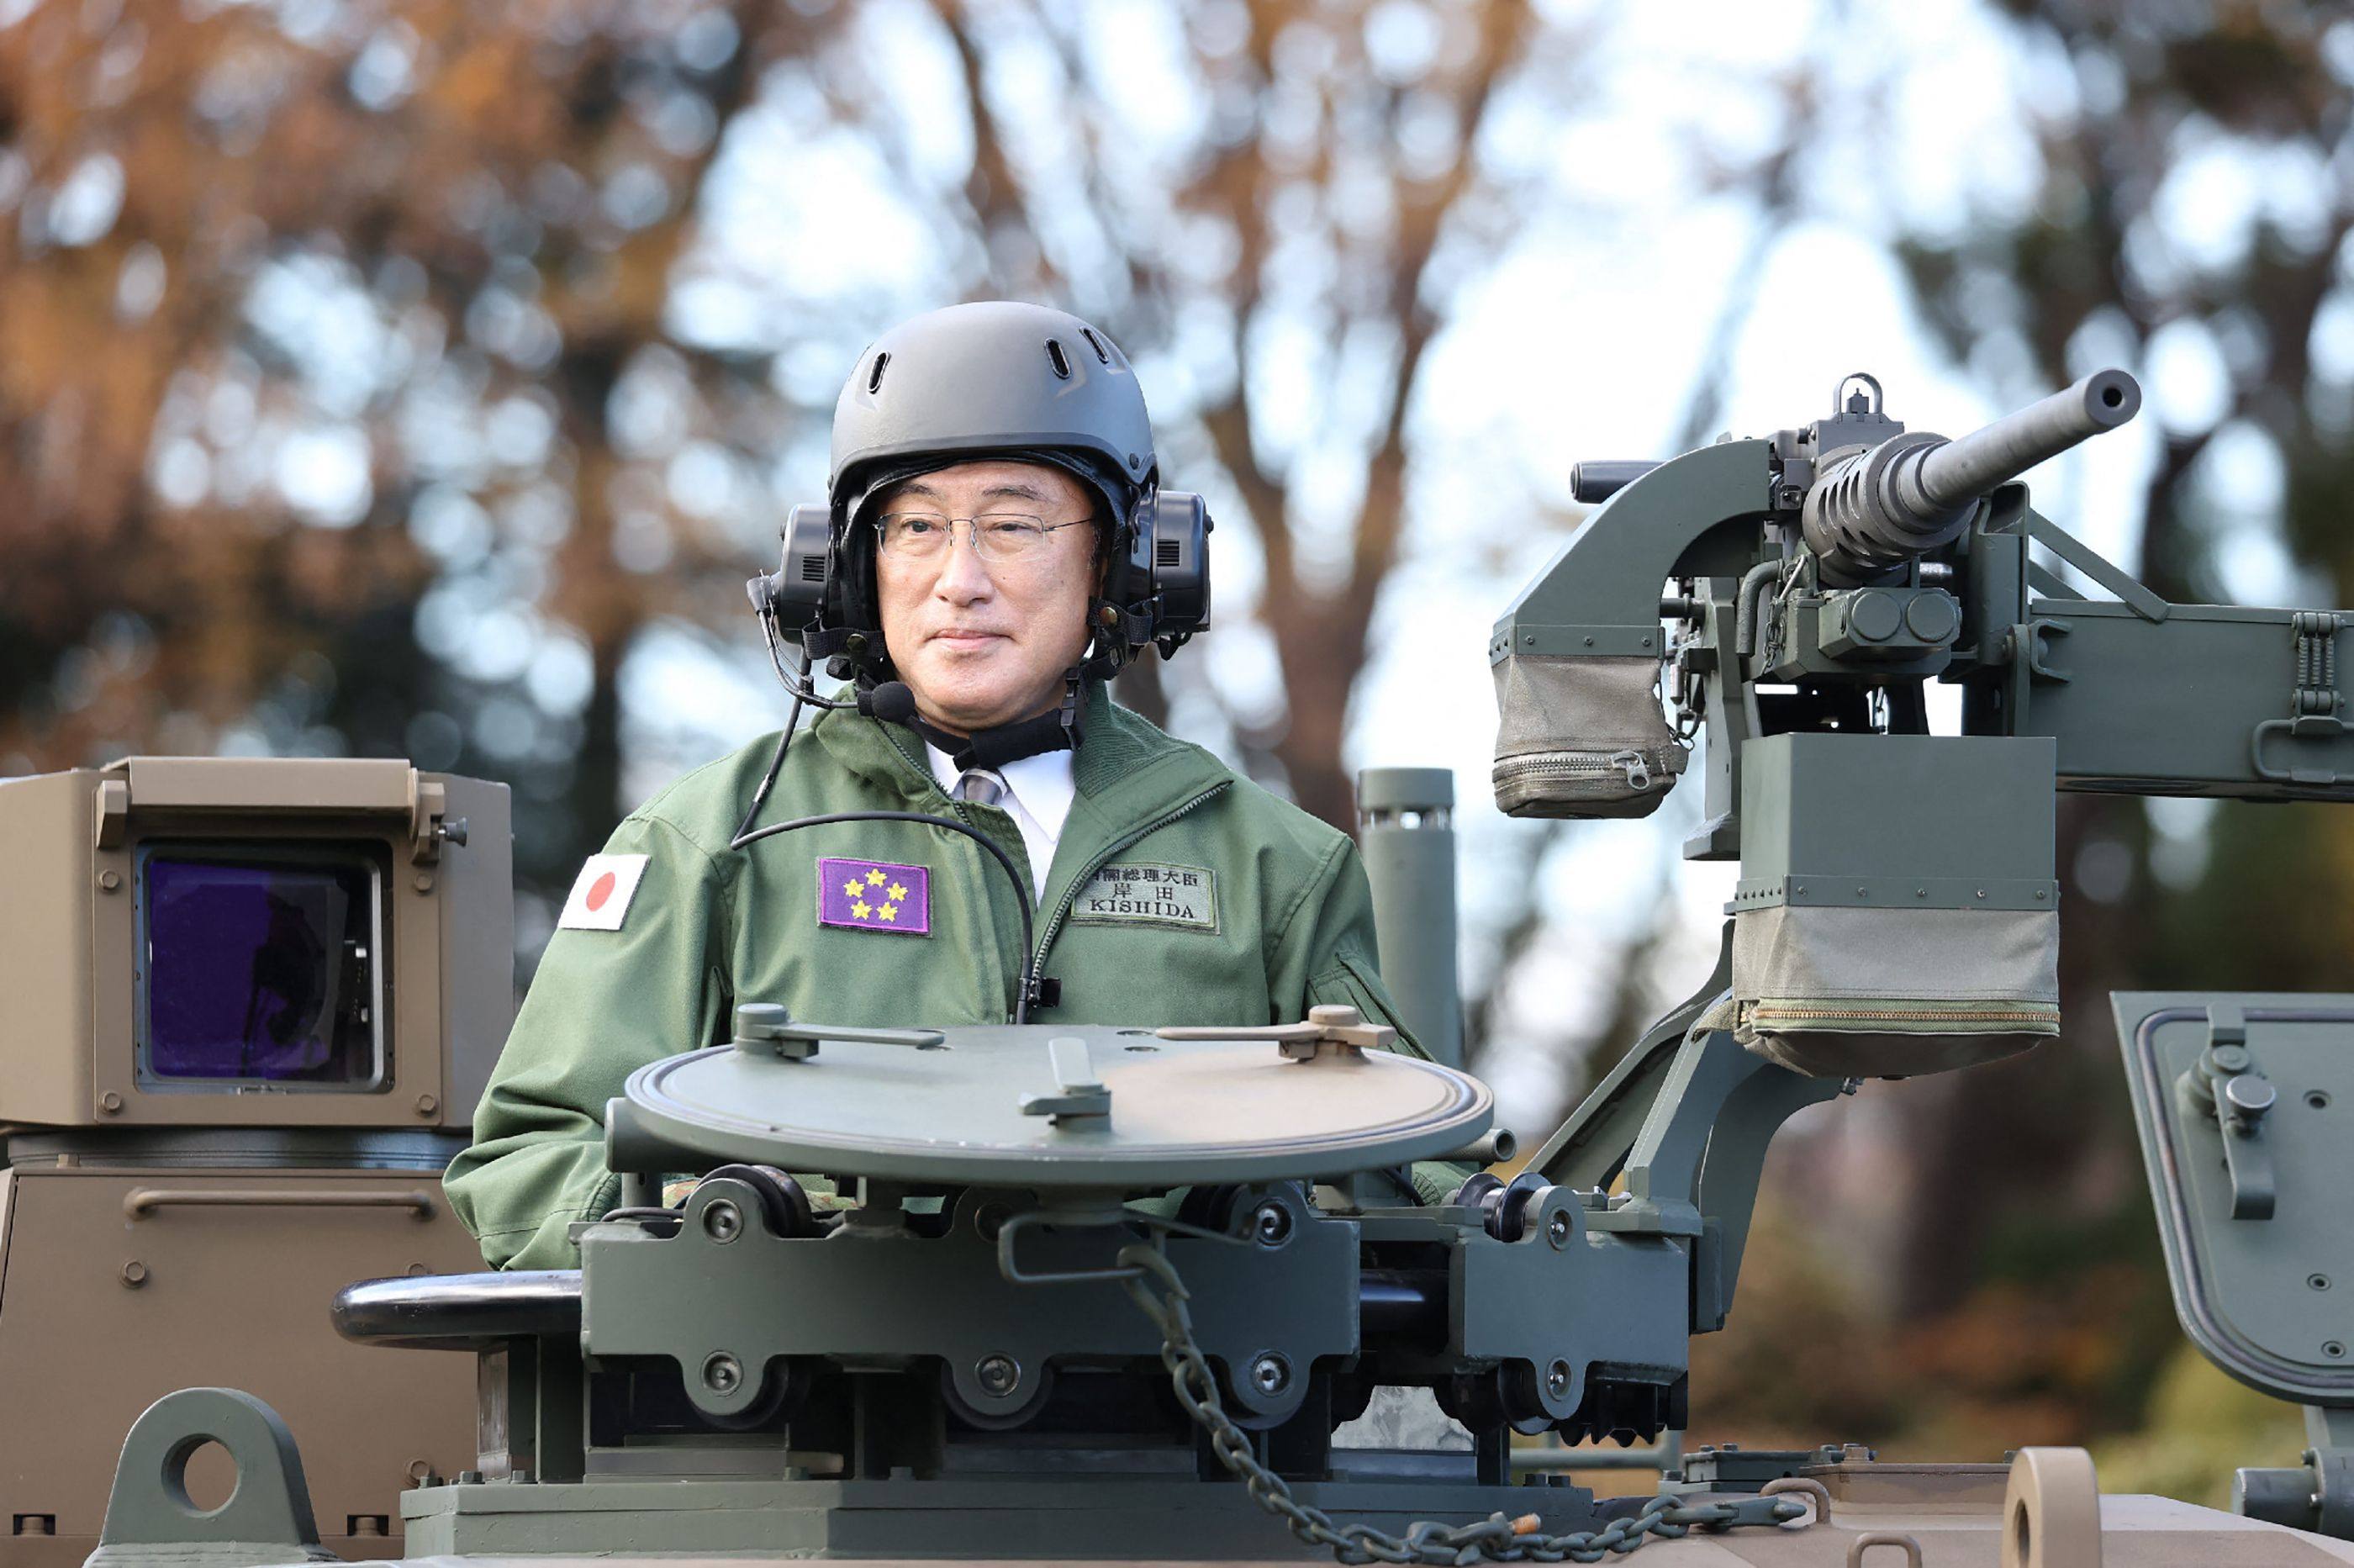 Japanese Prime Minister Fumio Kishida rides atop a tank during a military review at the Japanese Ground Self-Defence Force’s Camp Asaka in Tokyo on November 27, 2021. Kishida has ordered a sharp rise in defence spending to 2 per cent of gross domestic product by 2027. Photo: AFP